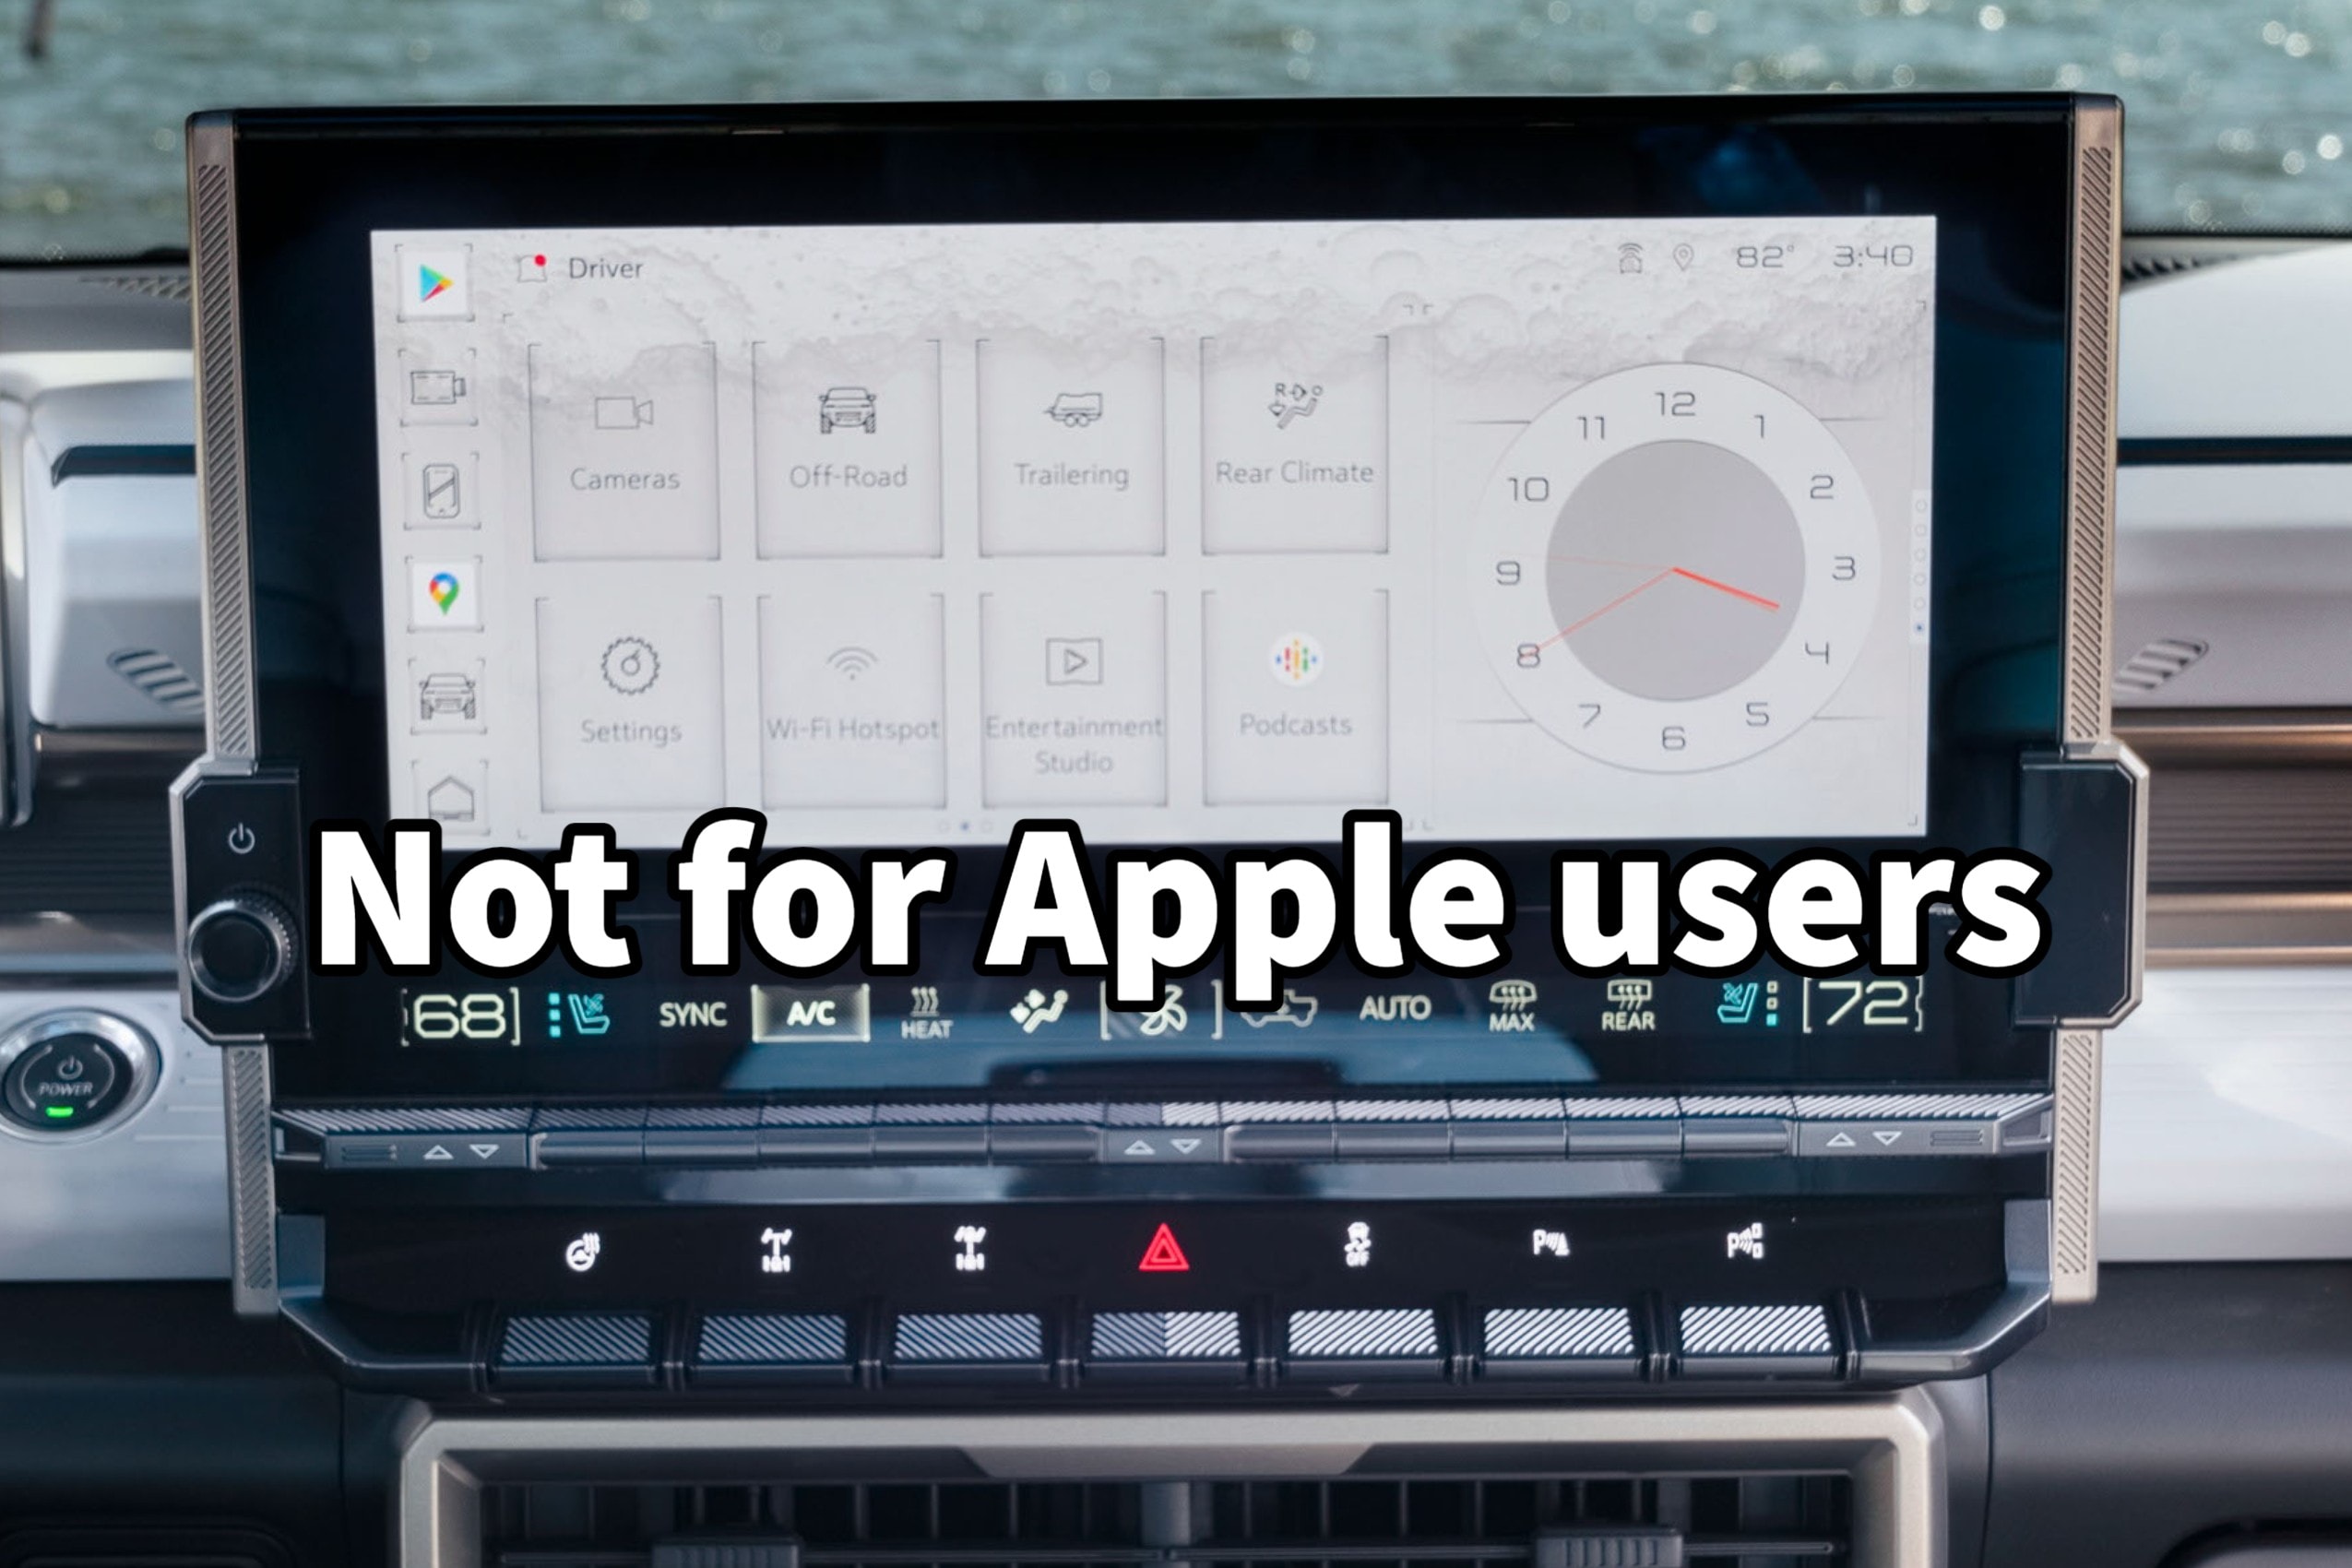 GM To Block Apple CarPlay in Its Future EVs To Sell Subscriptions